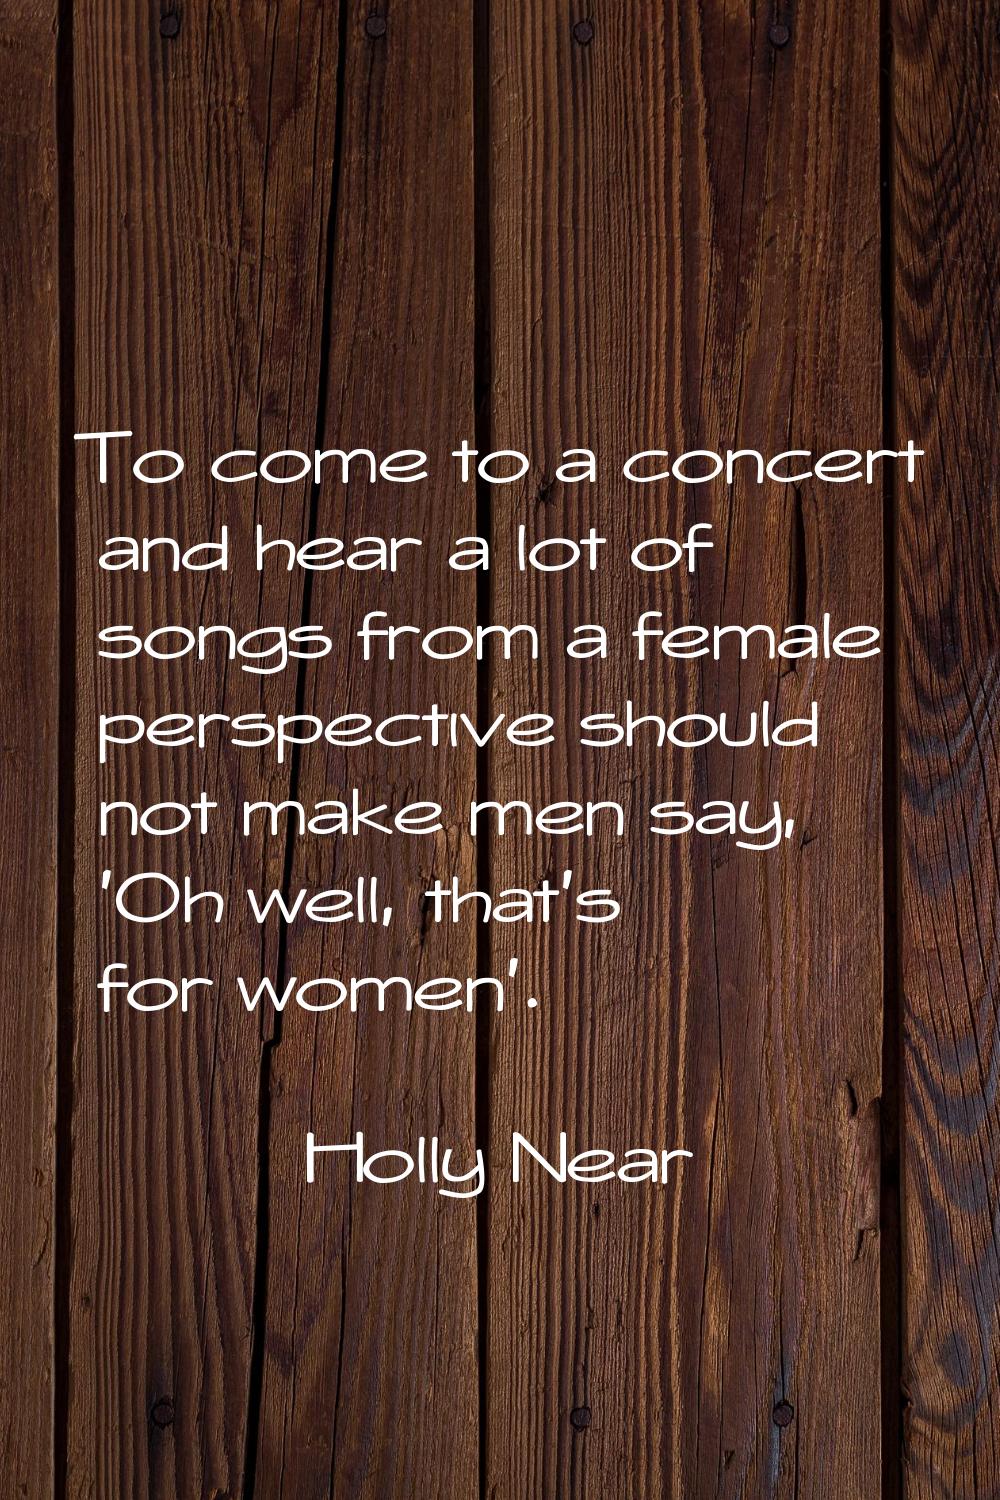 To come to a concert and hear a lot of songs from a female perspective should not make men say, 'Oh